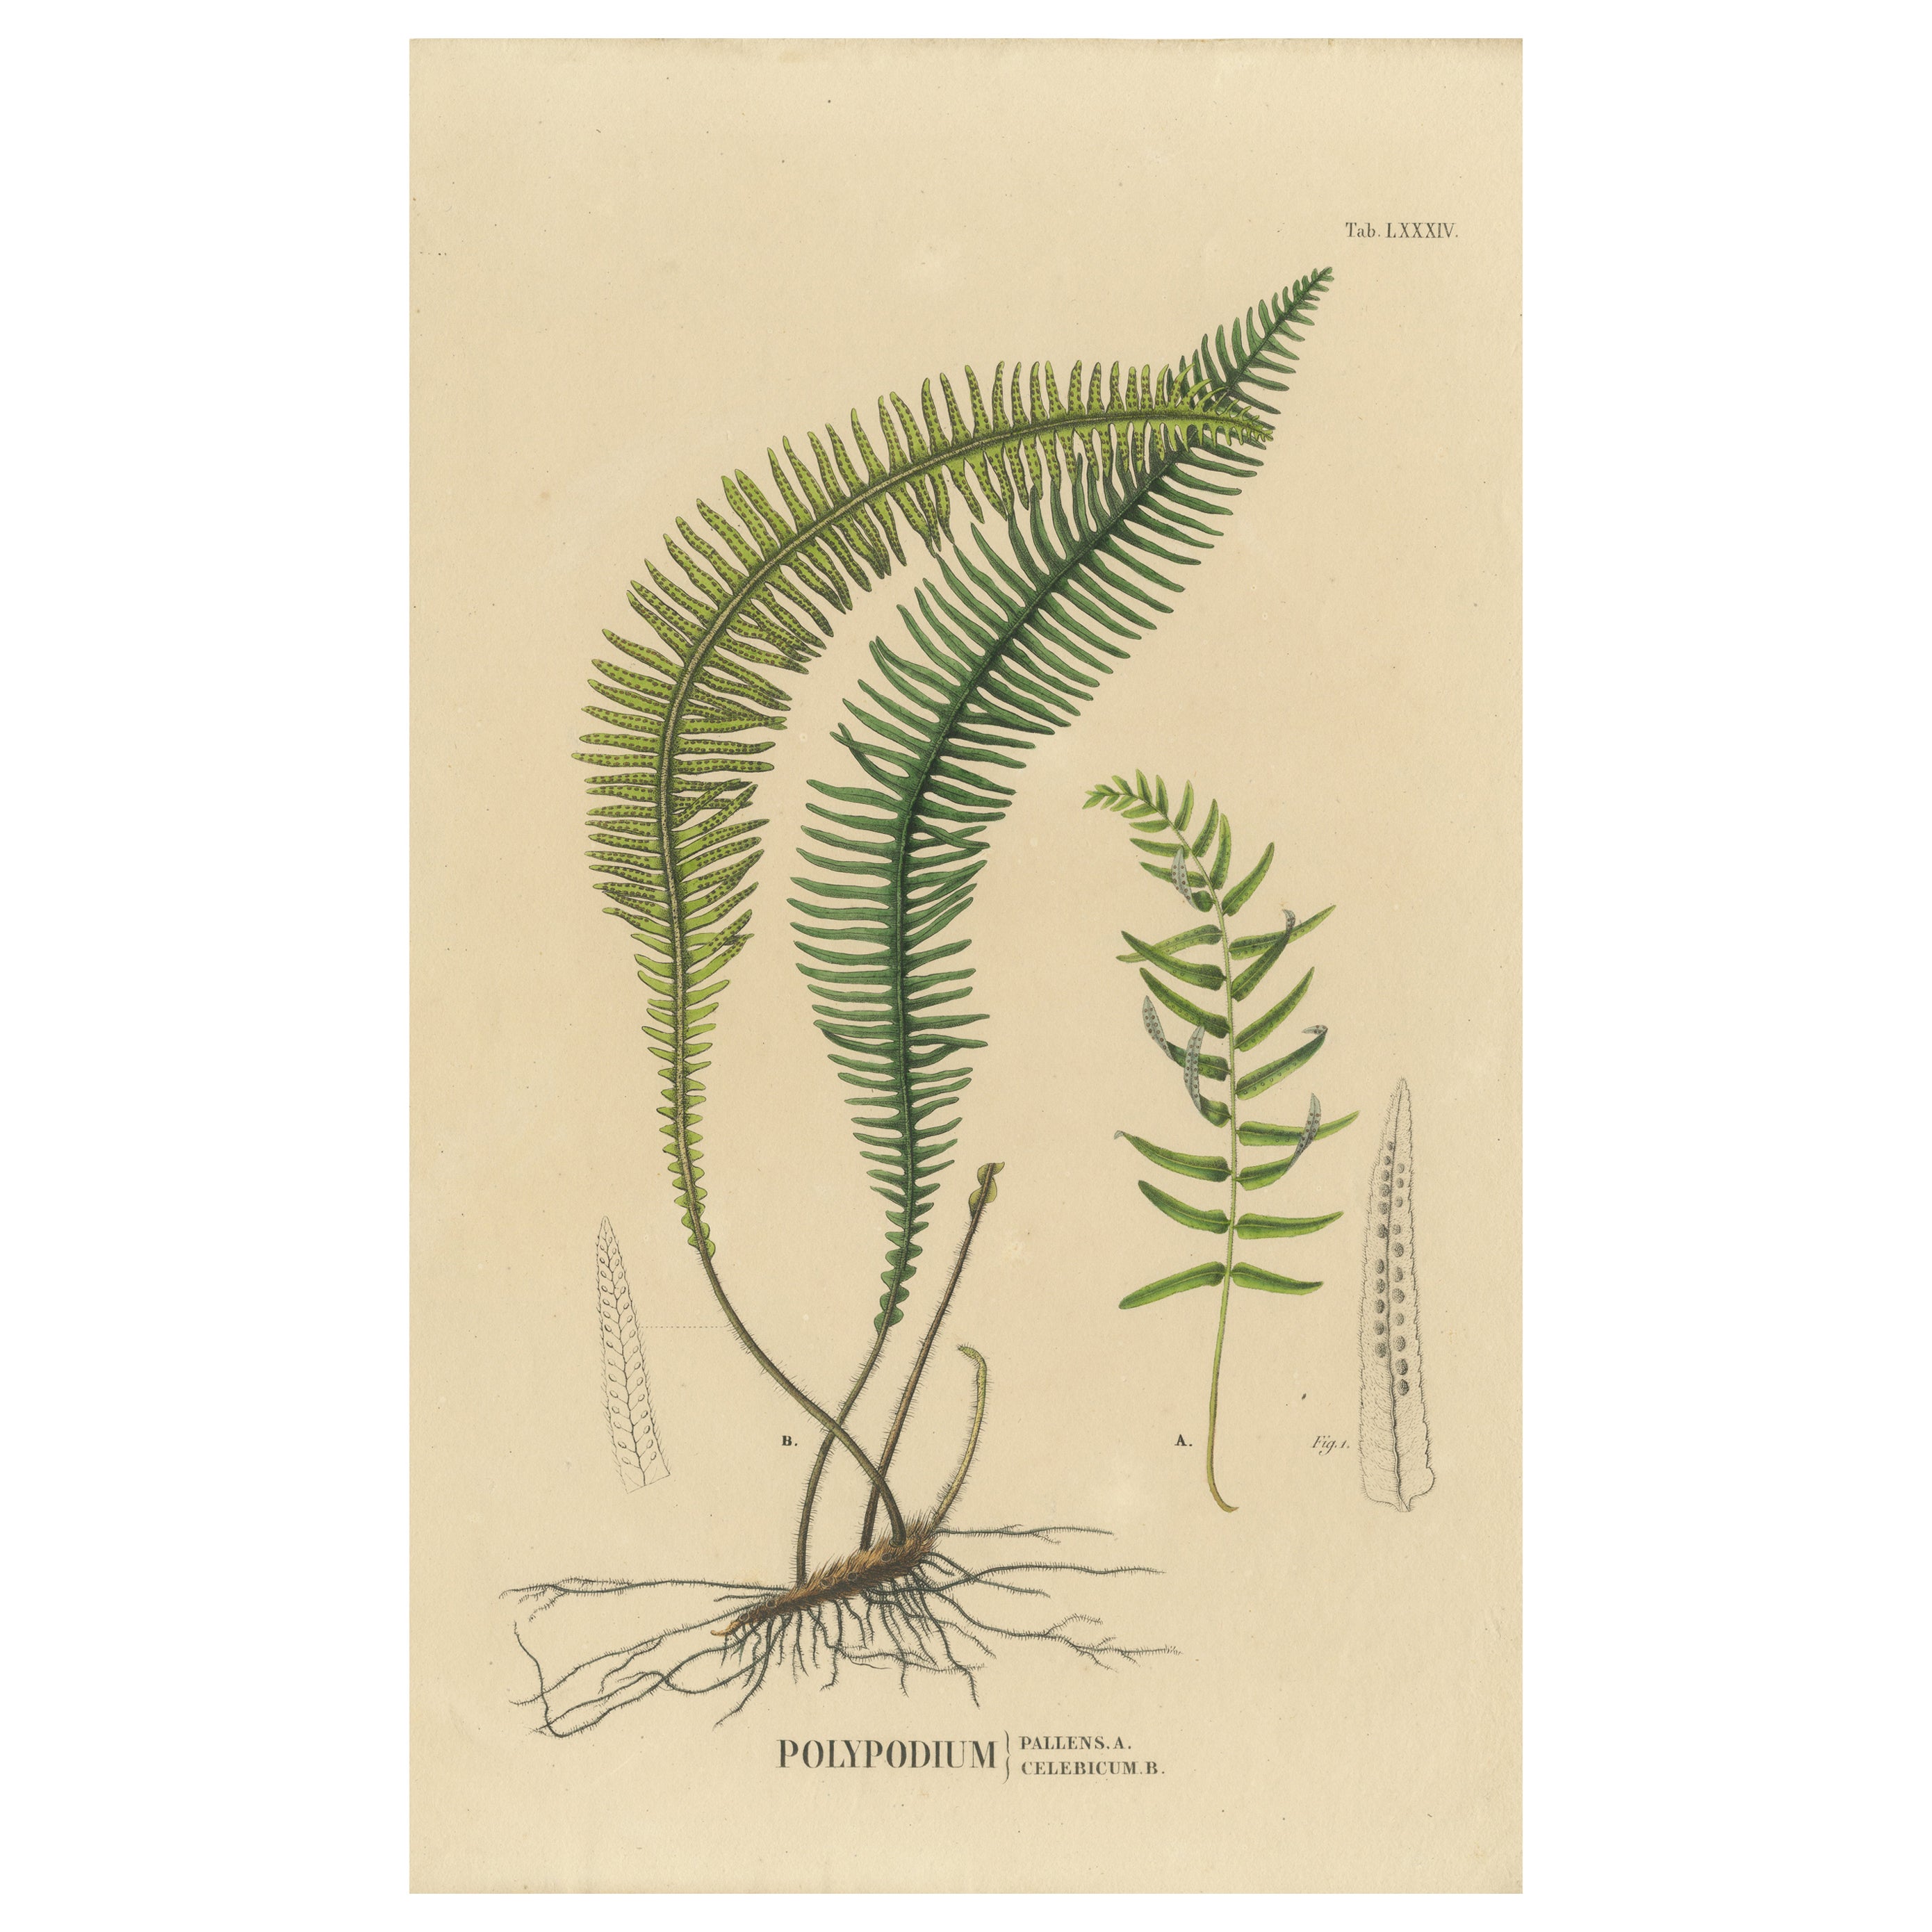 Artfully Handcolored Lithograph of Ferns of Java 'Polypodium', 1829